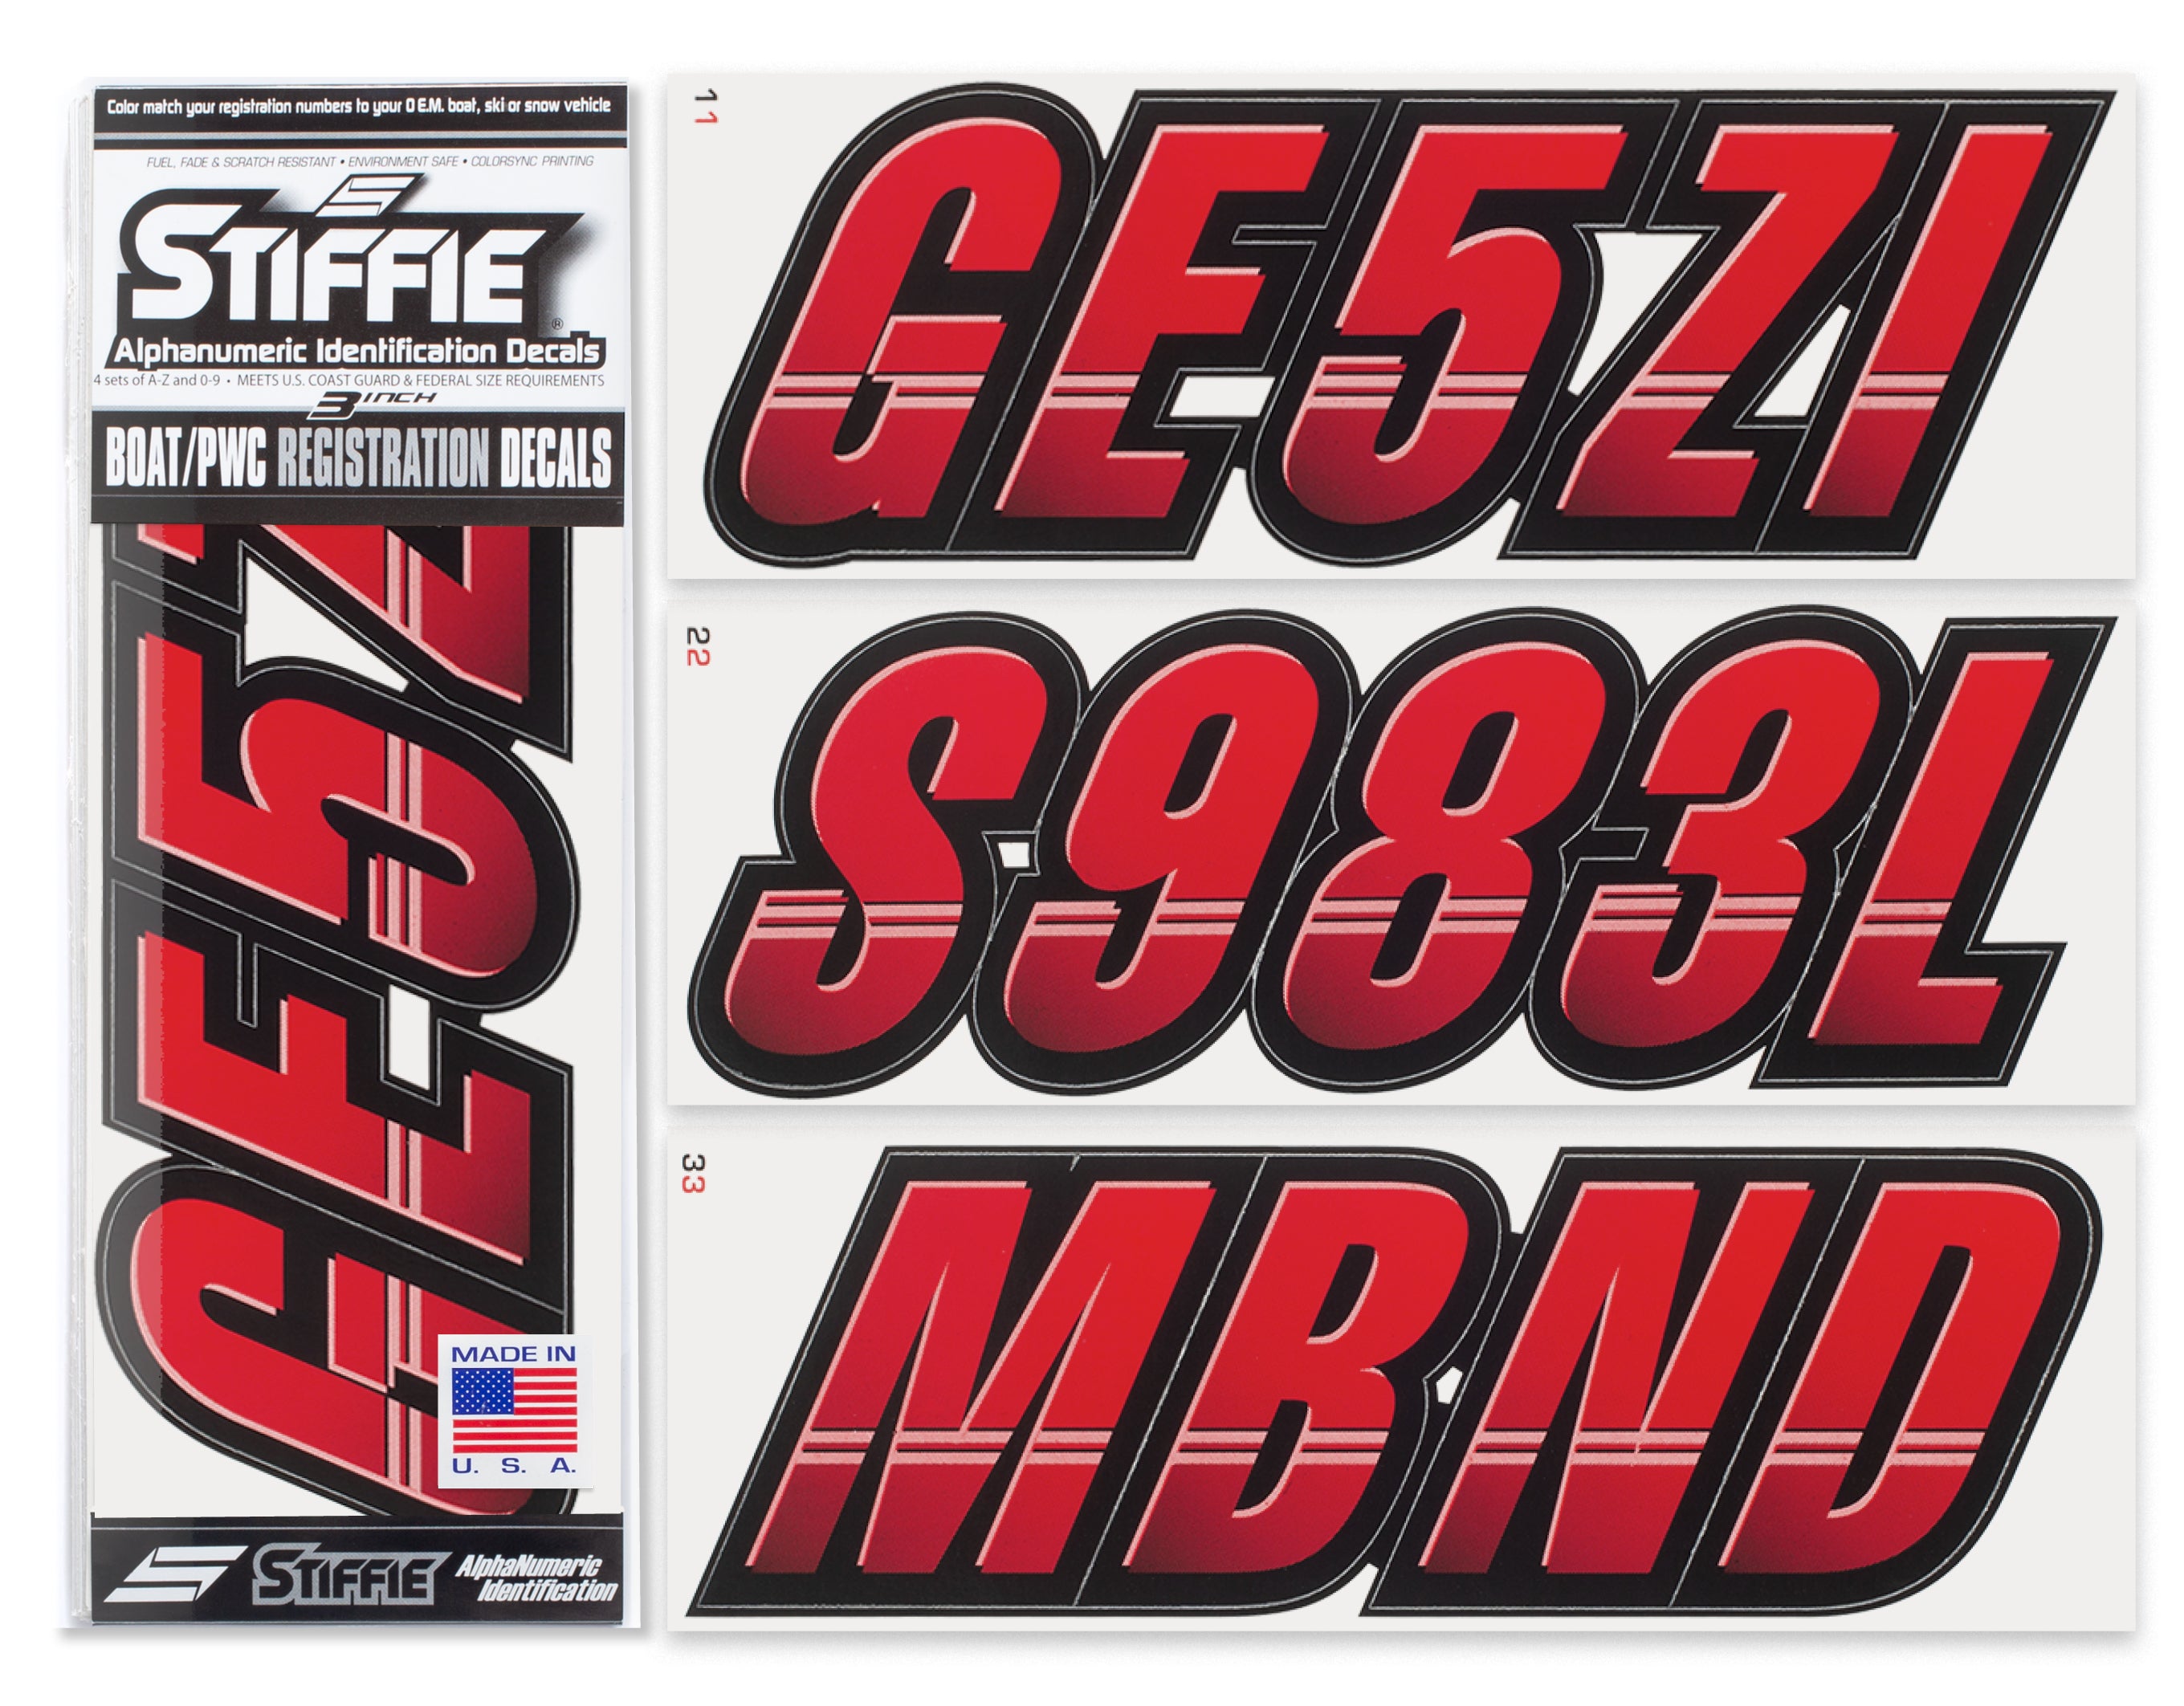 Stiffie Techtron Red/Black 3" Alpha-Numeric Registration Identification Numbers Stickers Decals for Boats & Personal Watercraft